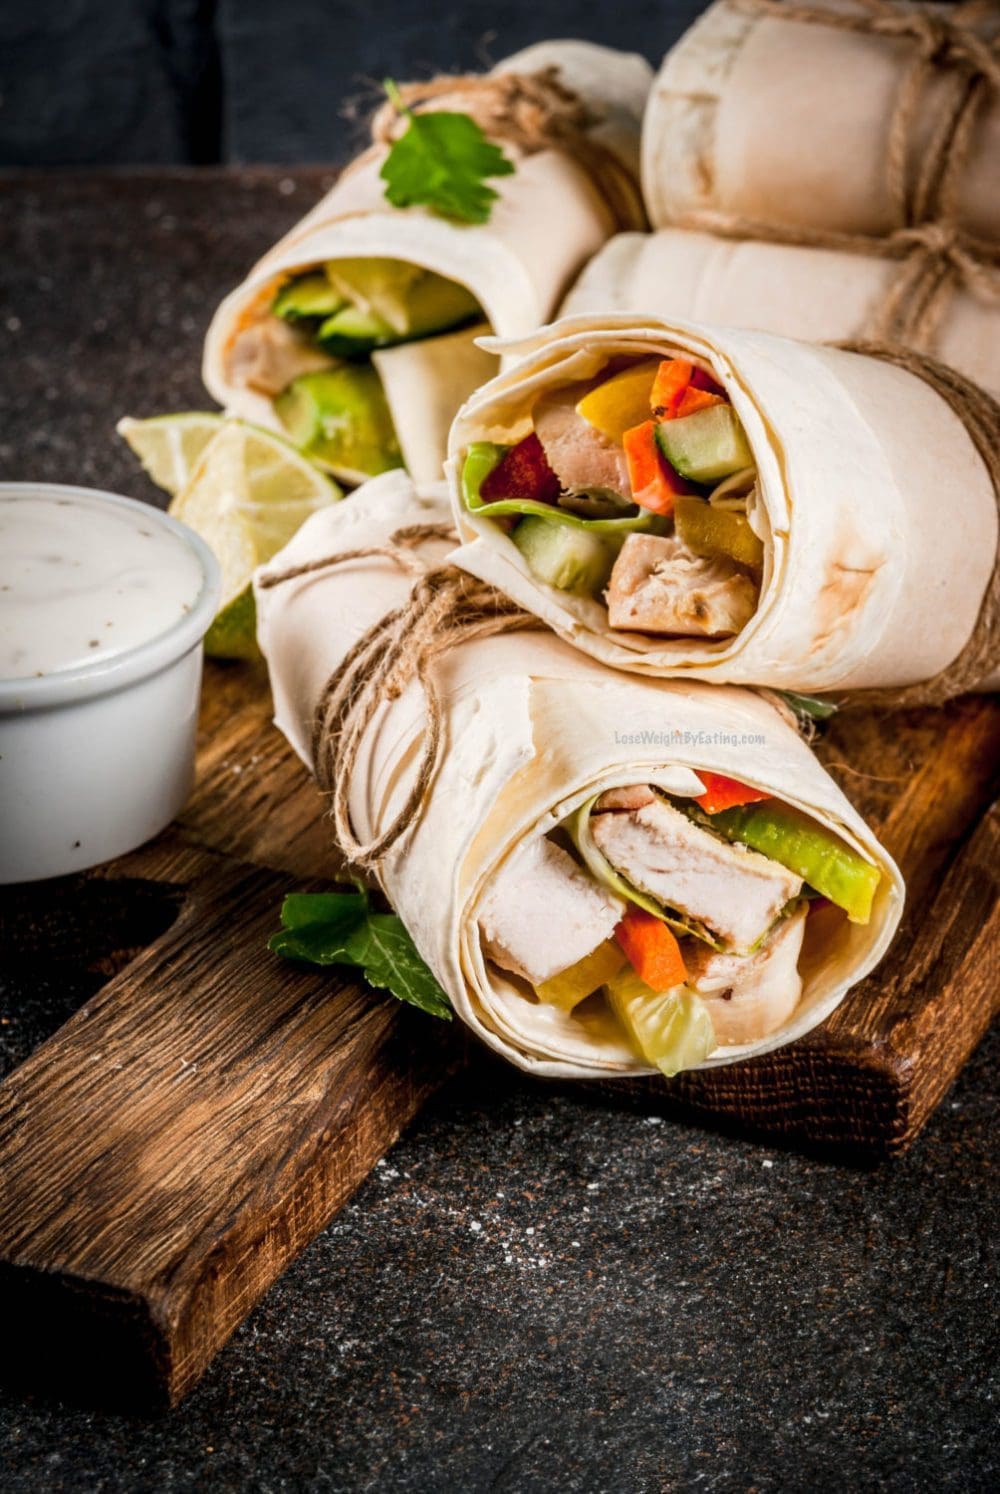 Tortilla Wrap Recipes for Lunch